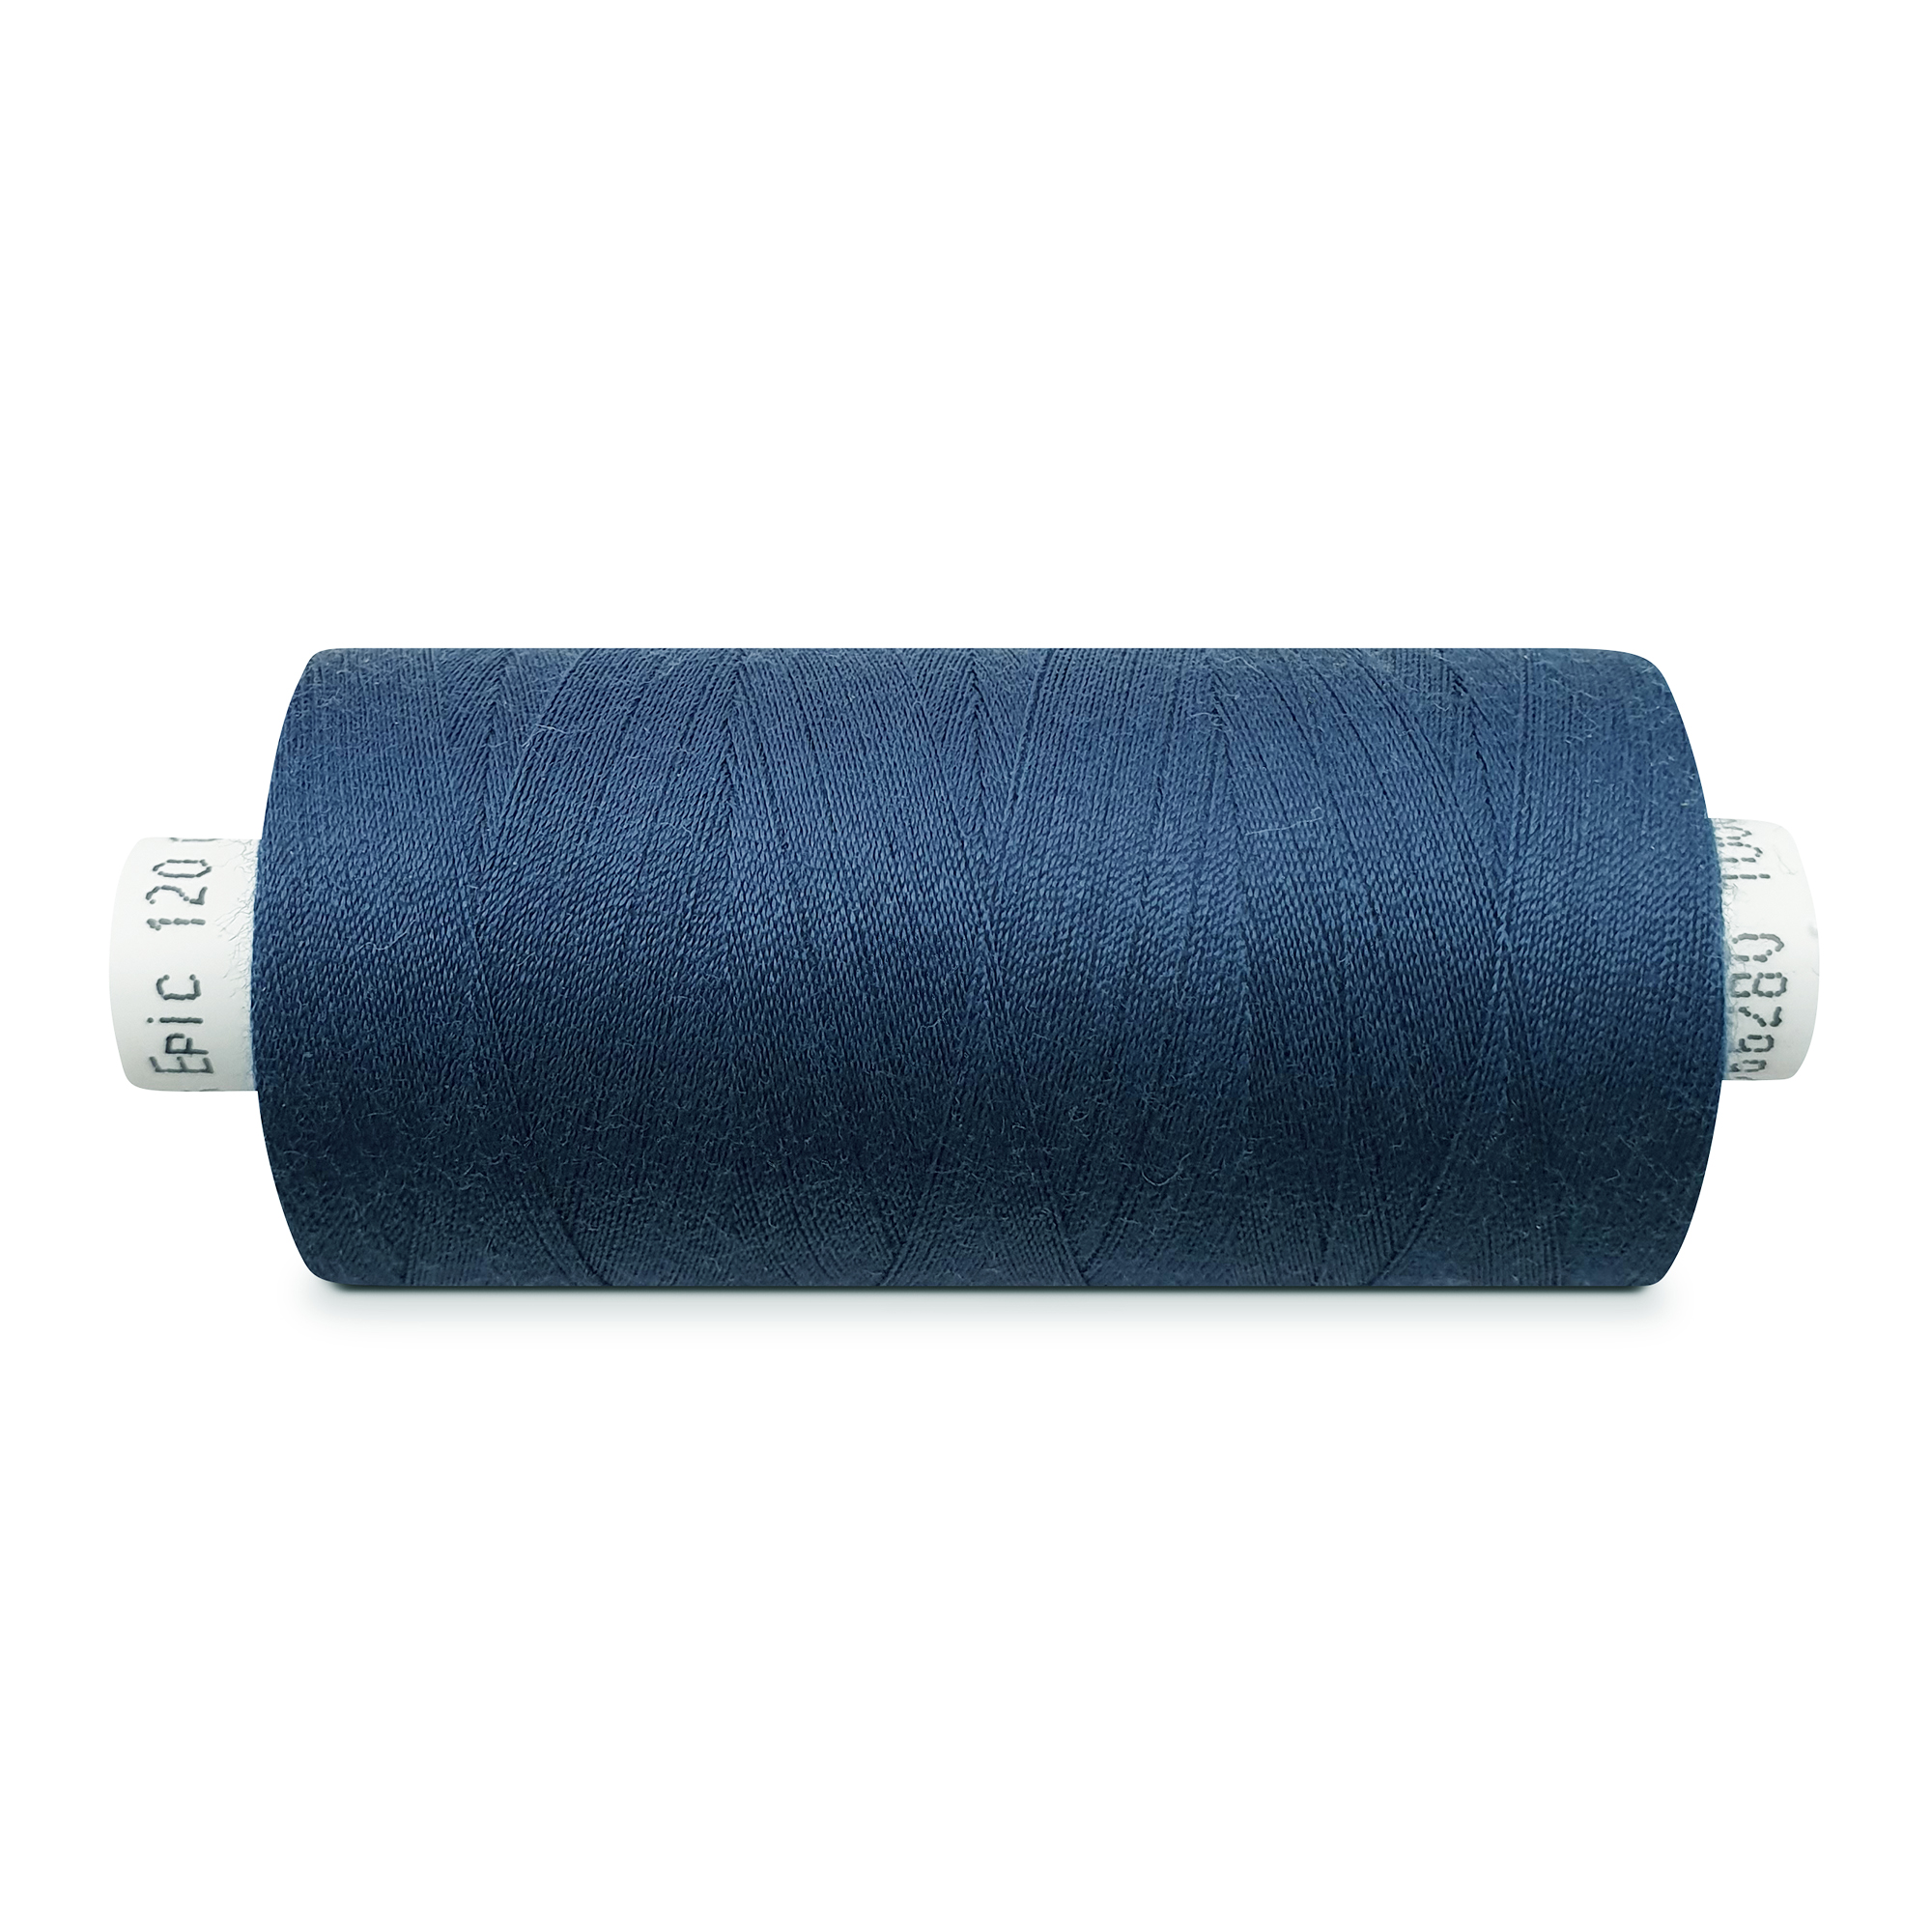 Jeans/Sewing thread blackish teal